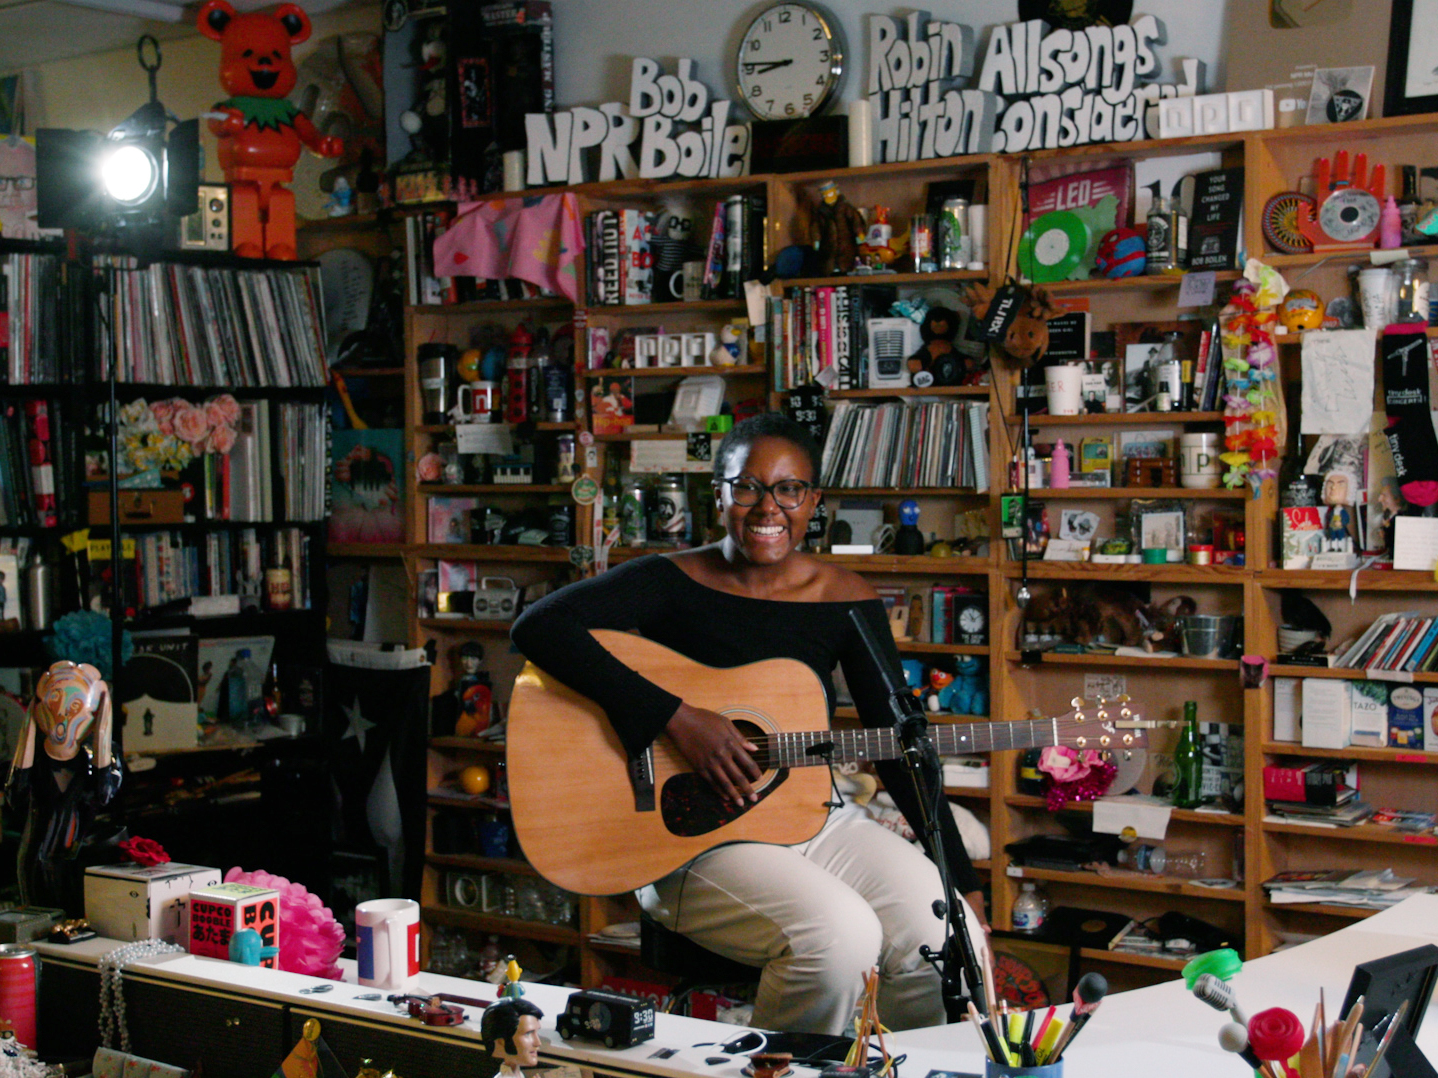 Featured image for “Watch | Tiny Desk winner Neffy”